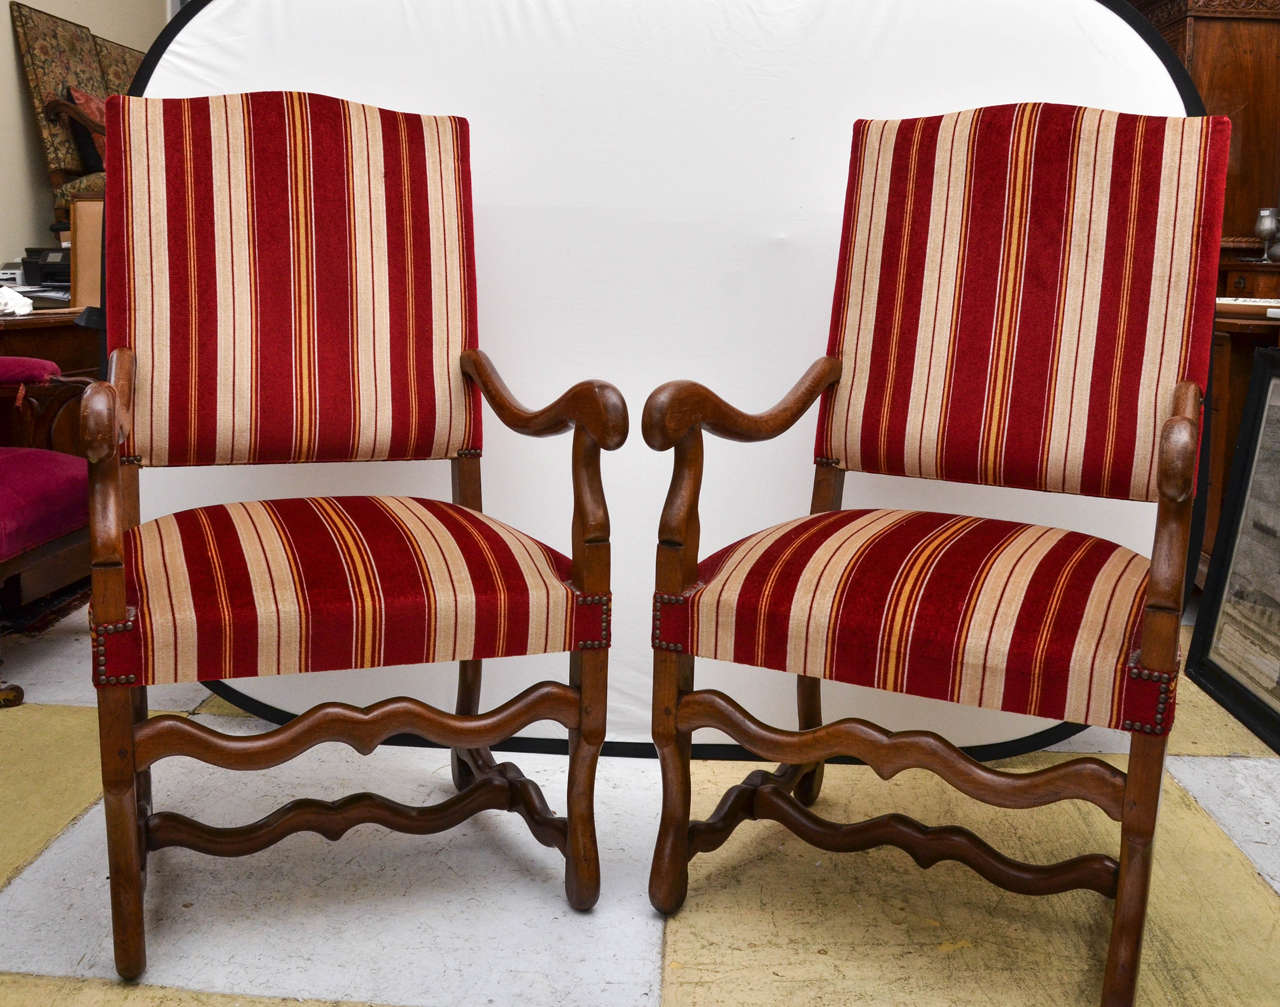 French early 20th century Oz De Mouton style open-arm salon chairs. Upholstered in a handsome red, khaki and yellow stripe velvet with almost no wear. The arms and legs are polished oak. The chairs are very comfortable.